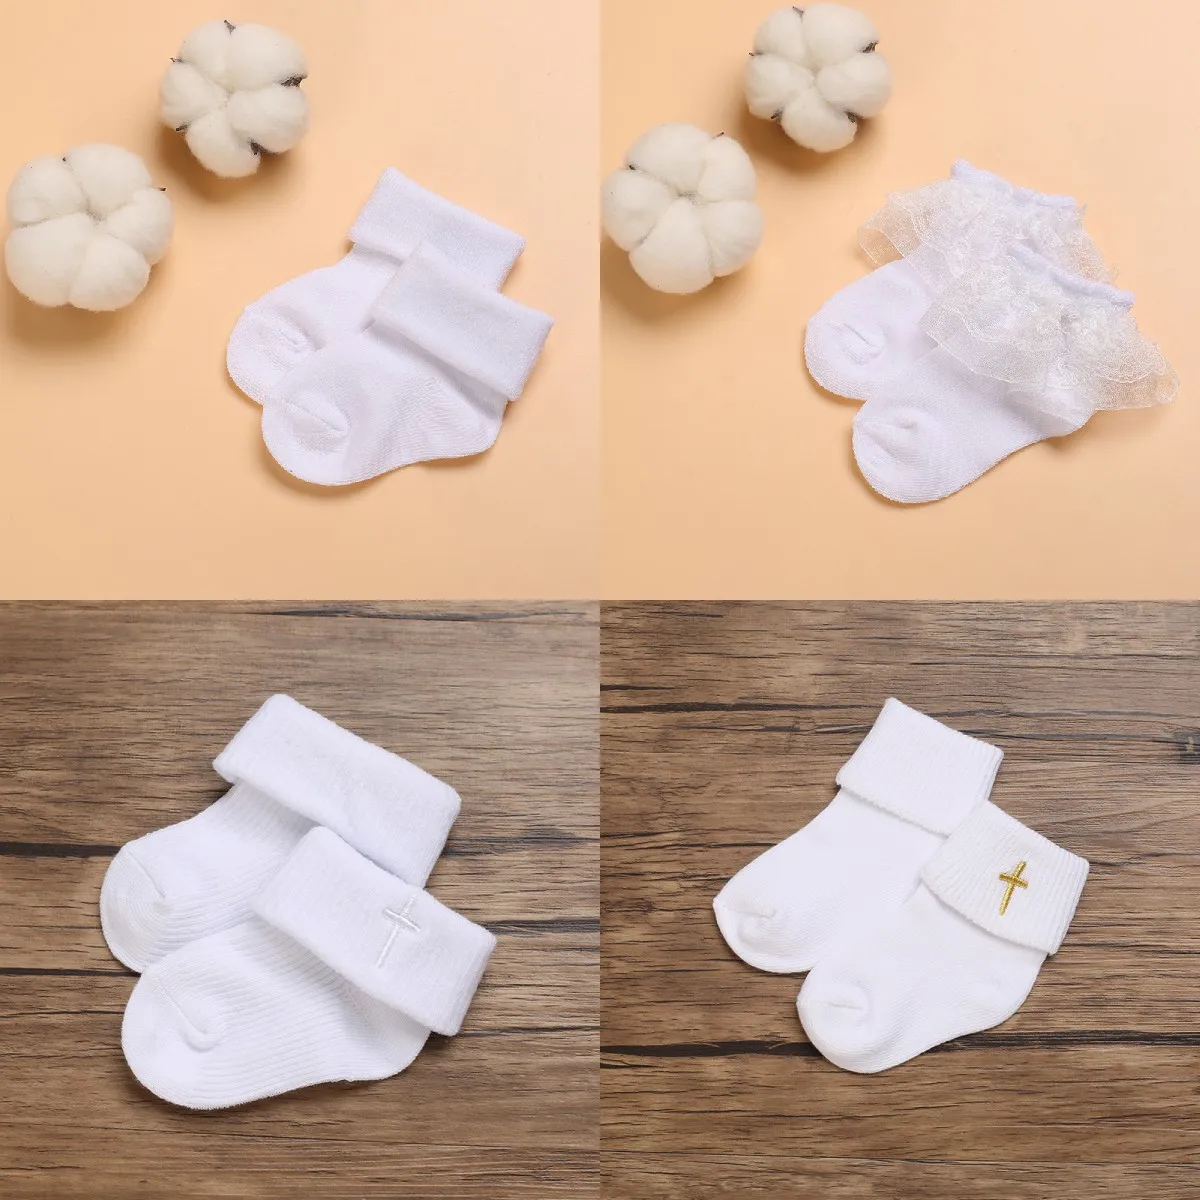 4 pairs of white versatile and adorable cotton baby socks for 0-1 year old newborn boys and girls